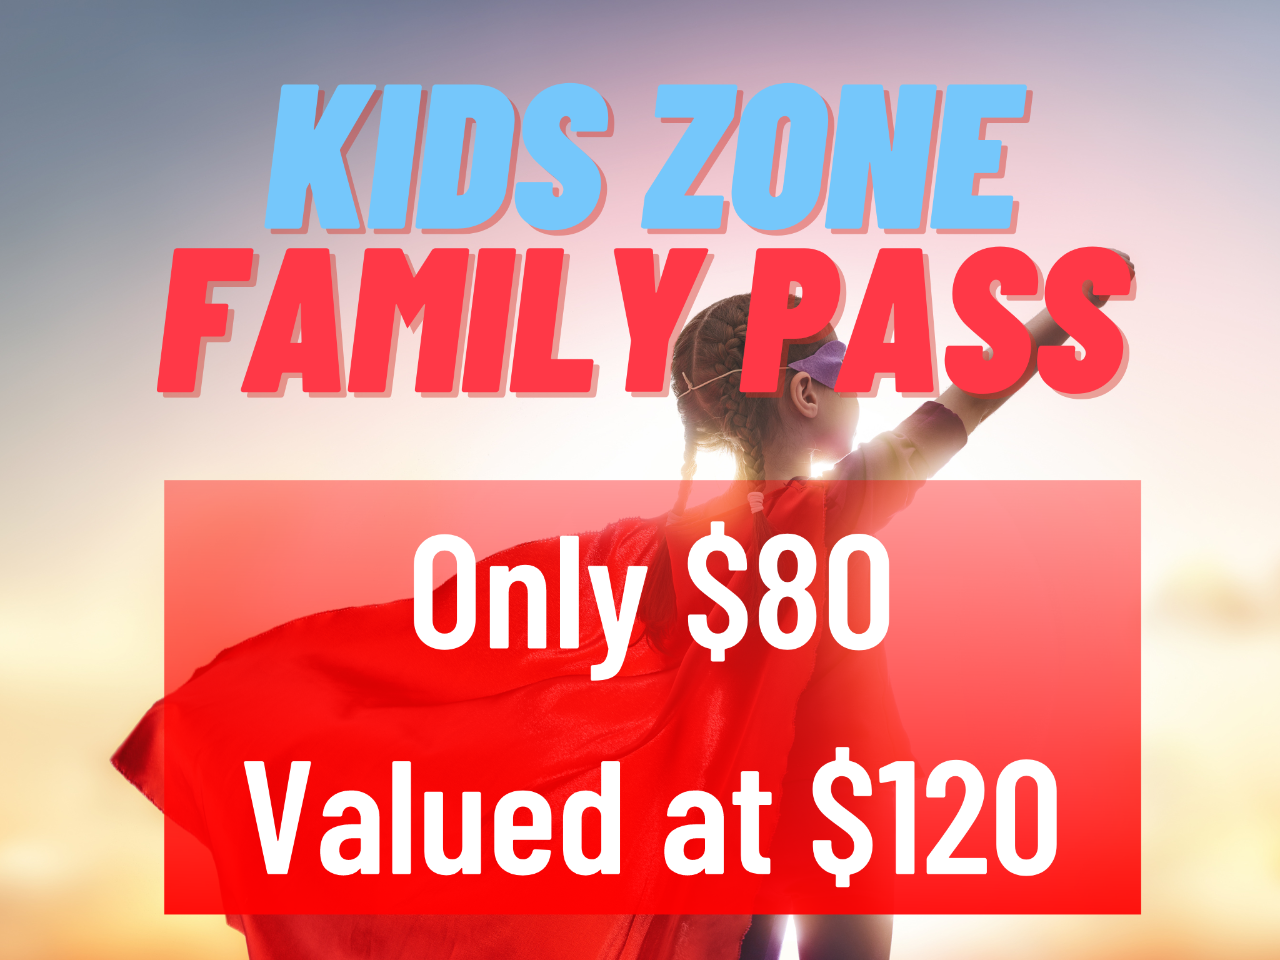 KIDS ZONE FAMILY PASS - PAY $80 & RECEIVE $120 - Use Promocode (KIDSCLUB) to apply discount